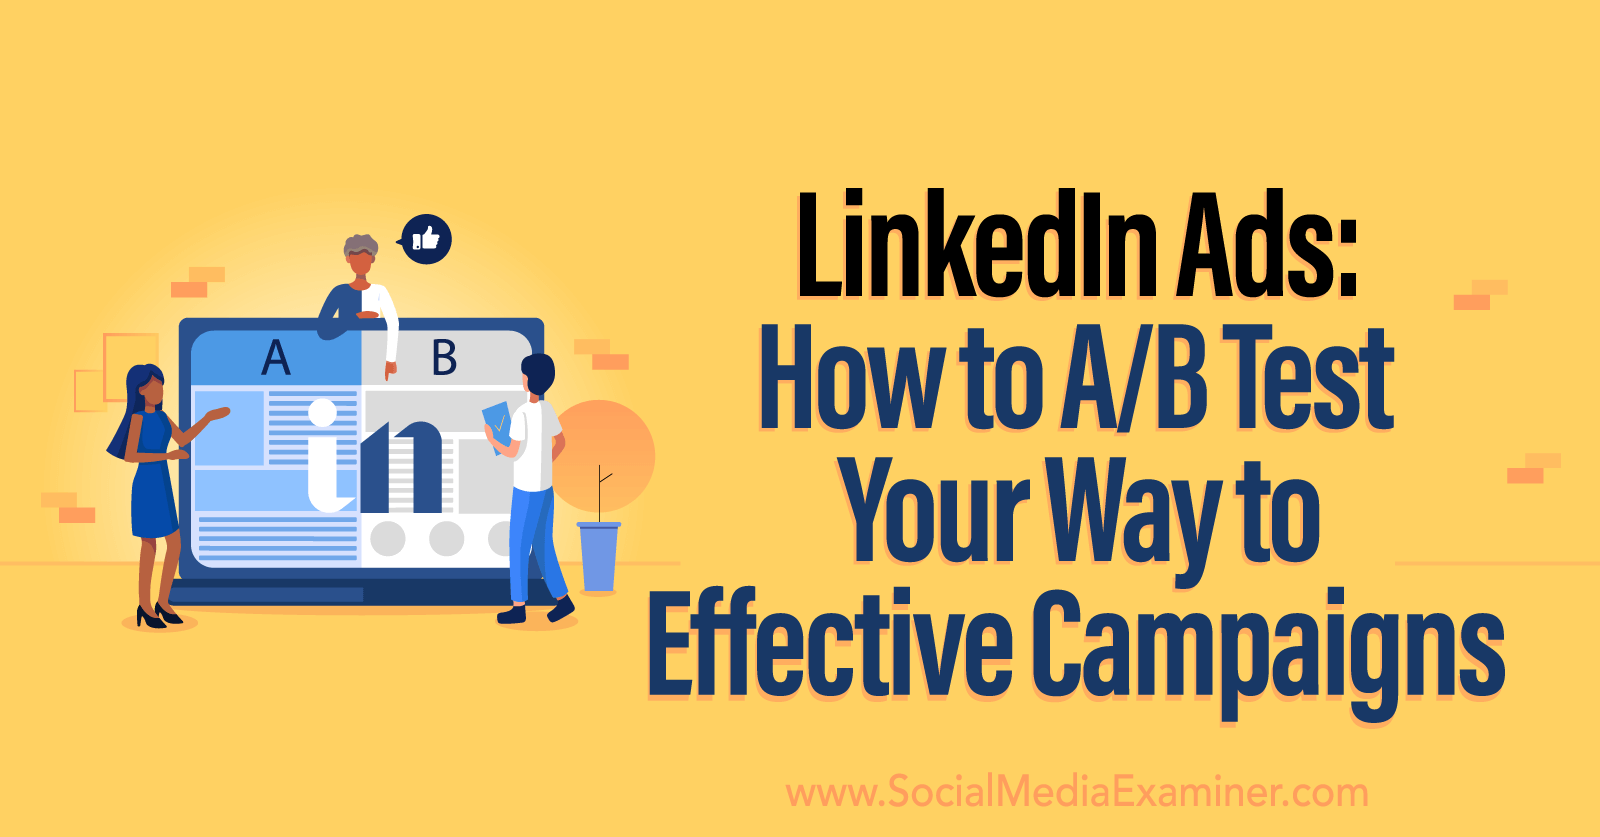 LinkedIn Ads: How to A/B Test Your Way to Effective Campaigns by Social Media Examiner